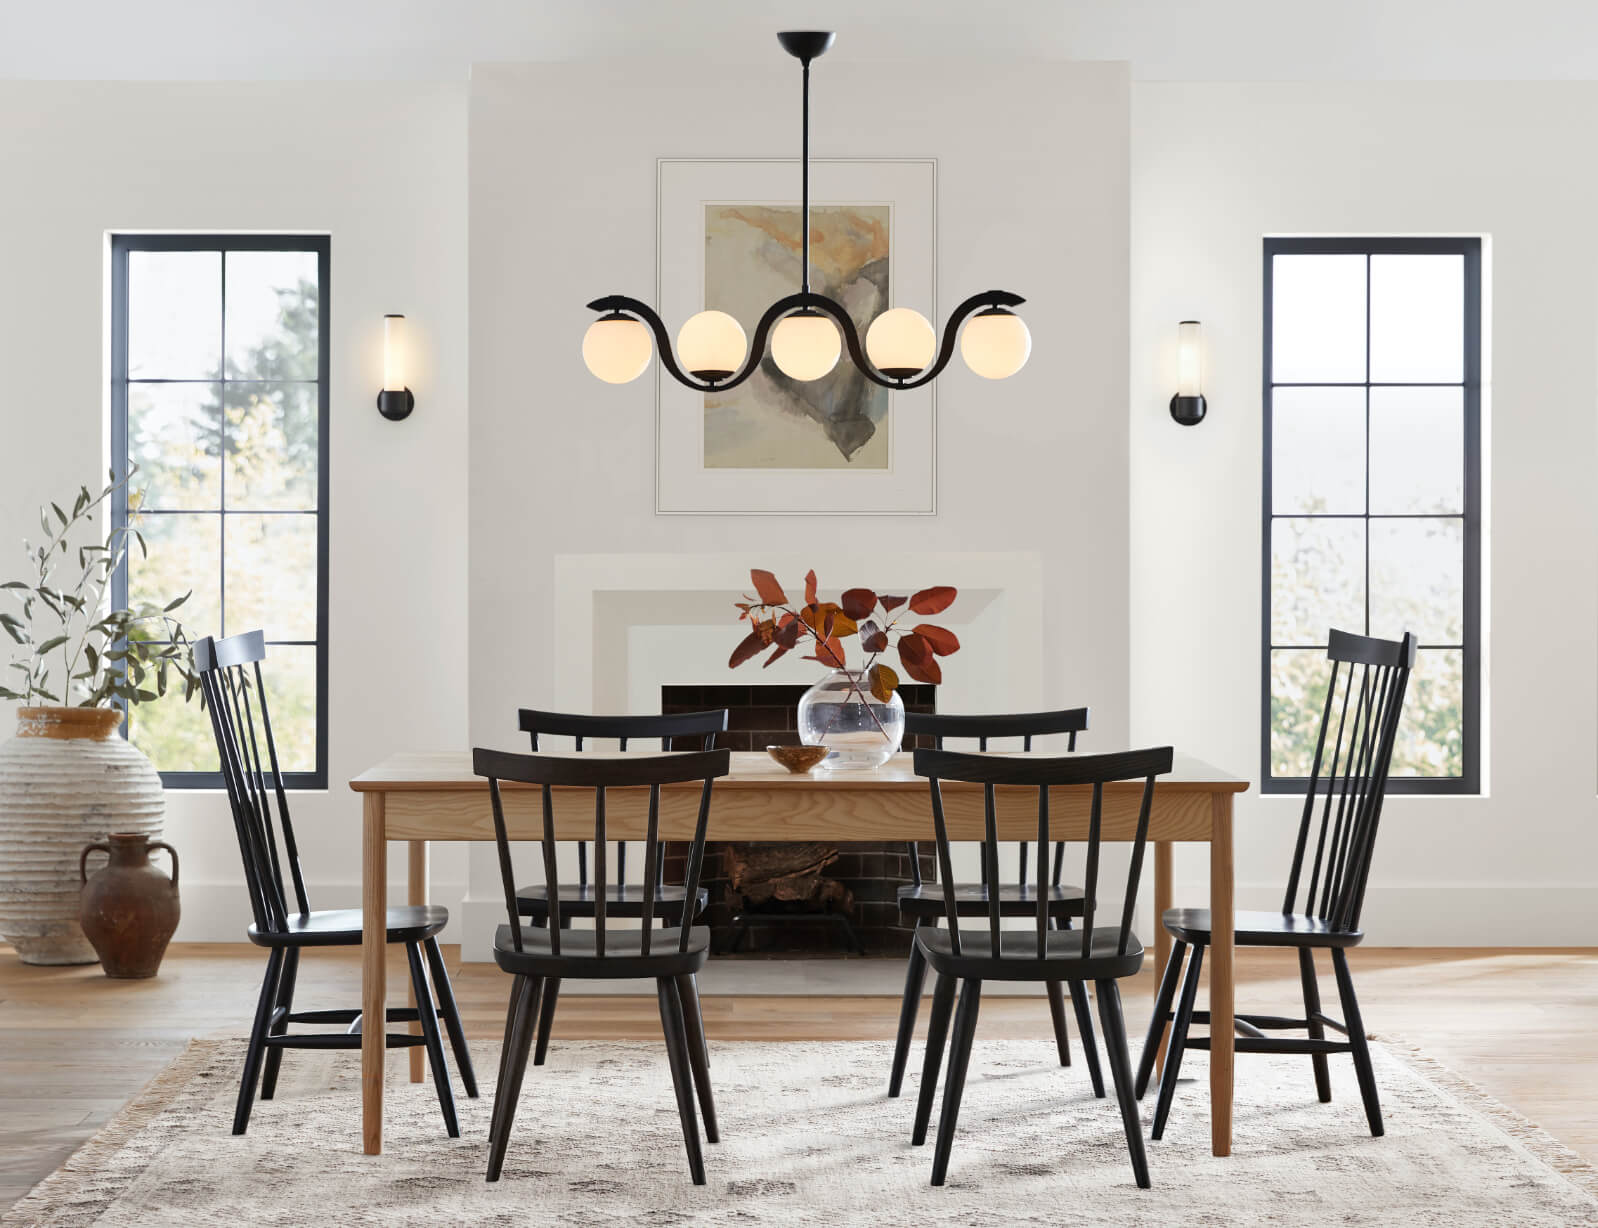 How To Choose Dining Room Lighting, How Low Should A Chandelier Hang Over Kitchen Table